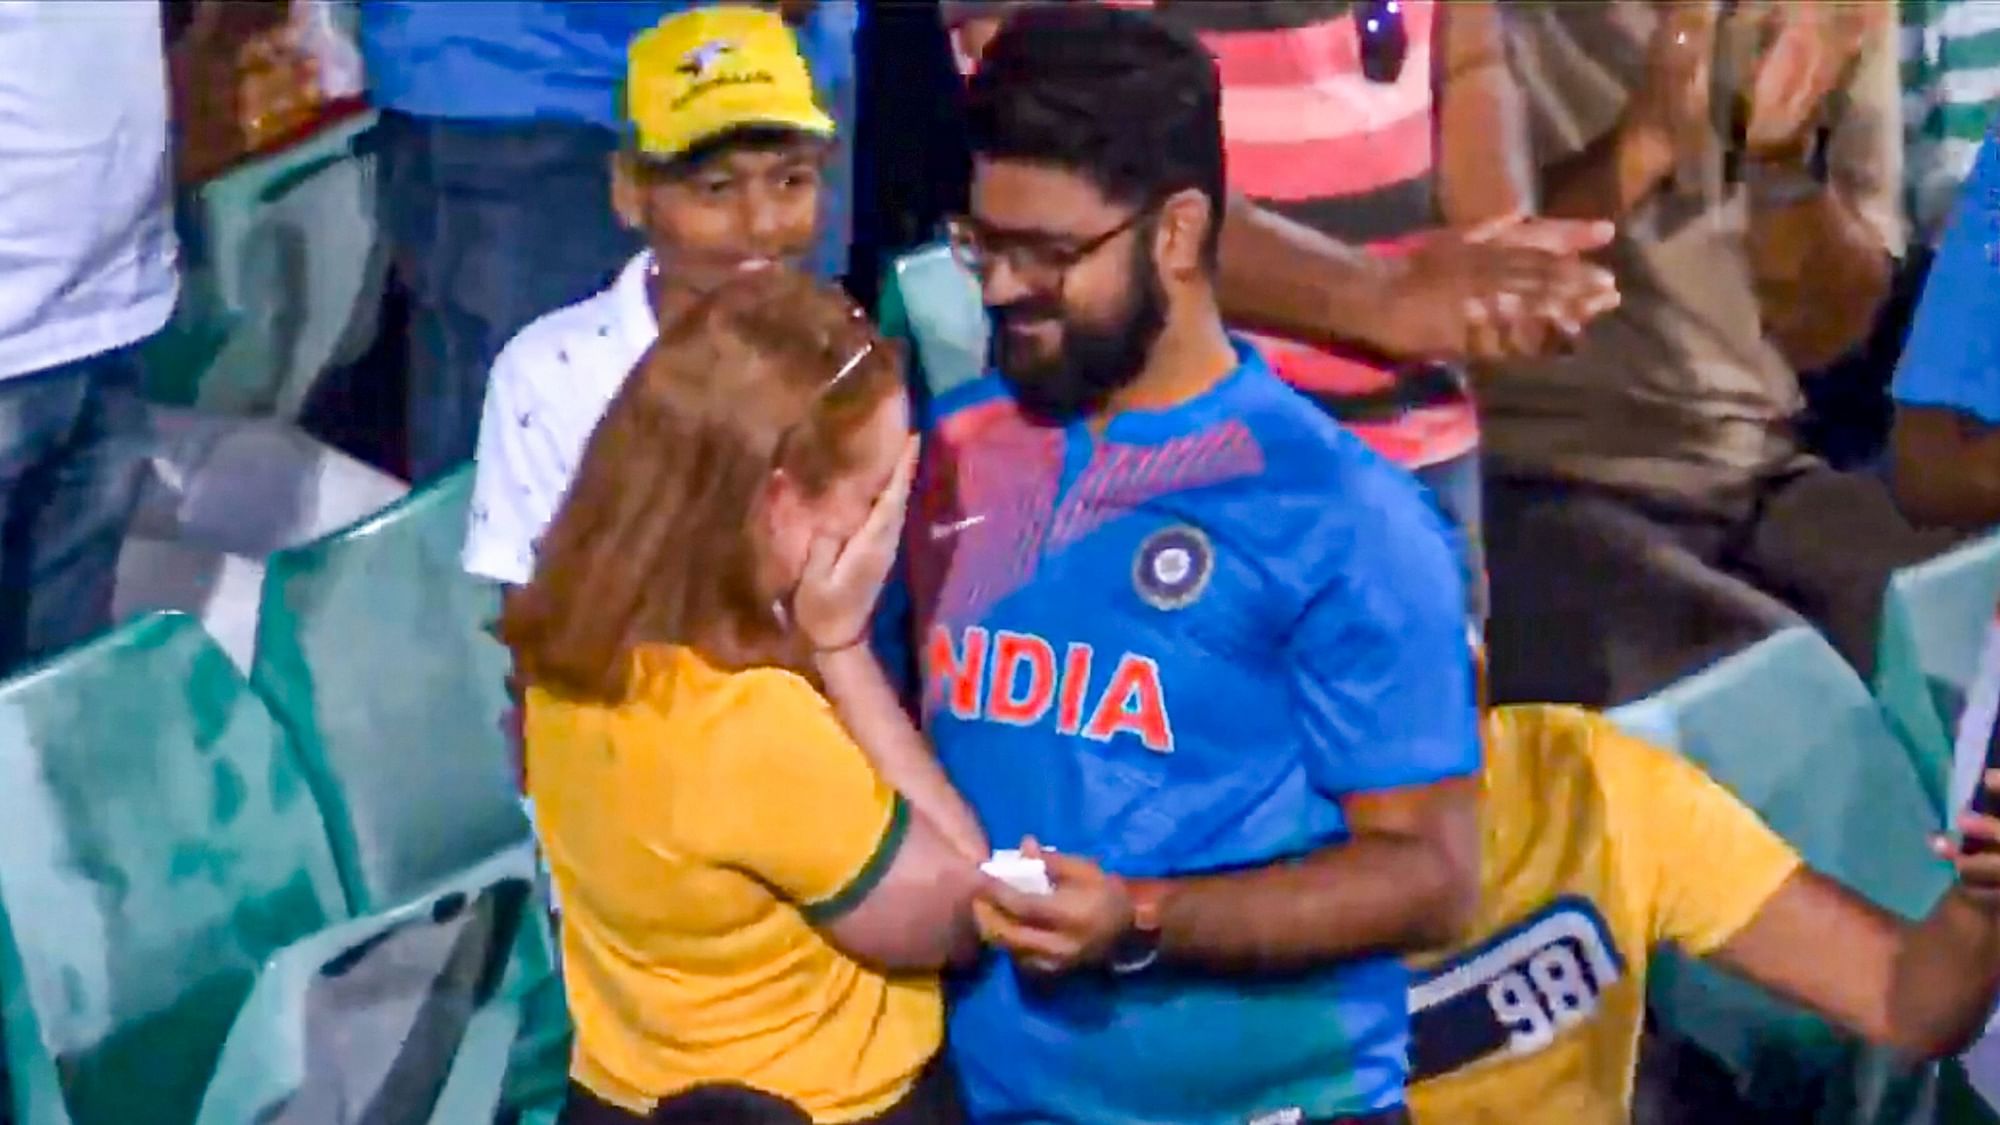 A man proposed on the sidelines of the India vs Australia ODI in Sydney on Sunday.